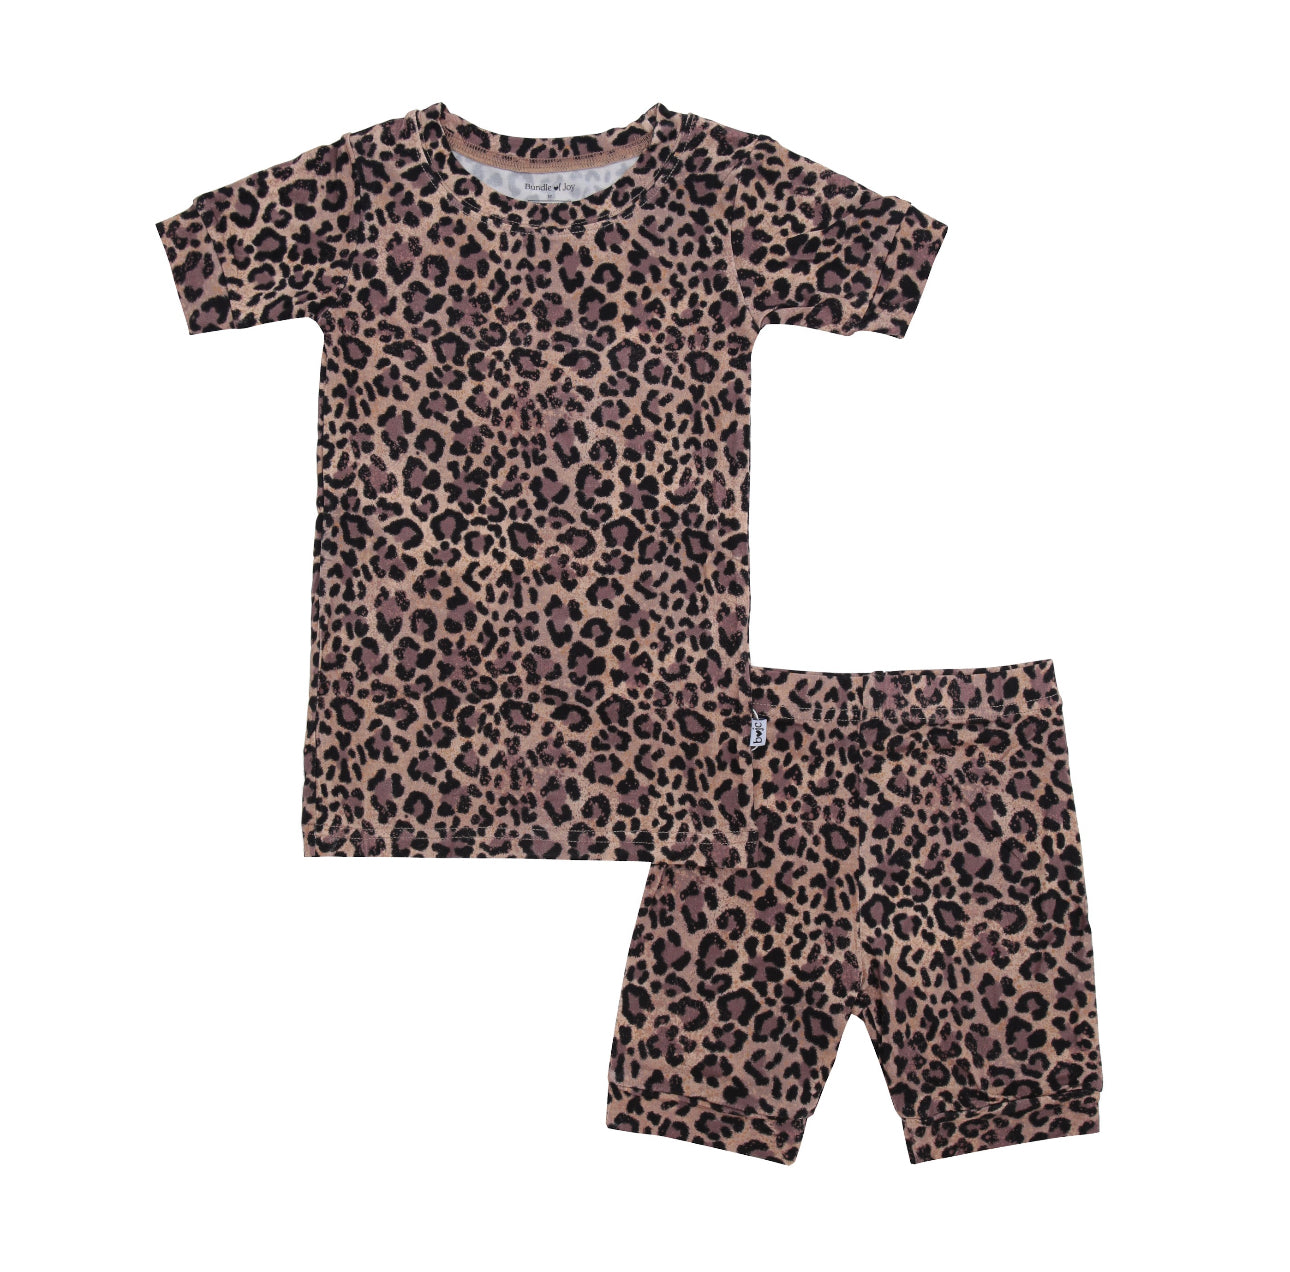 Wild about you bamboo Shorts set